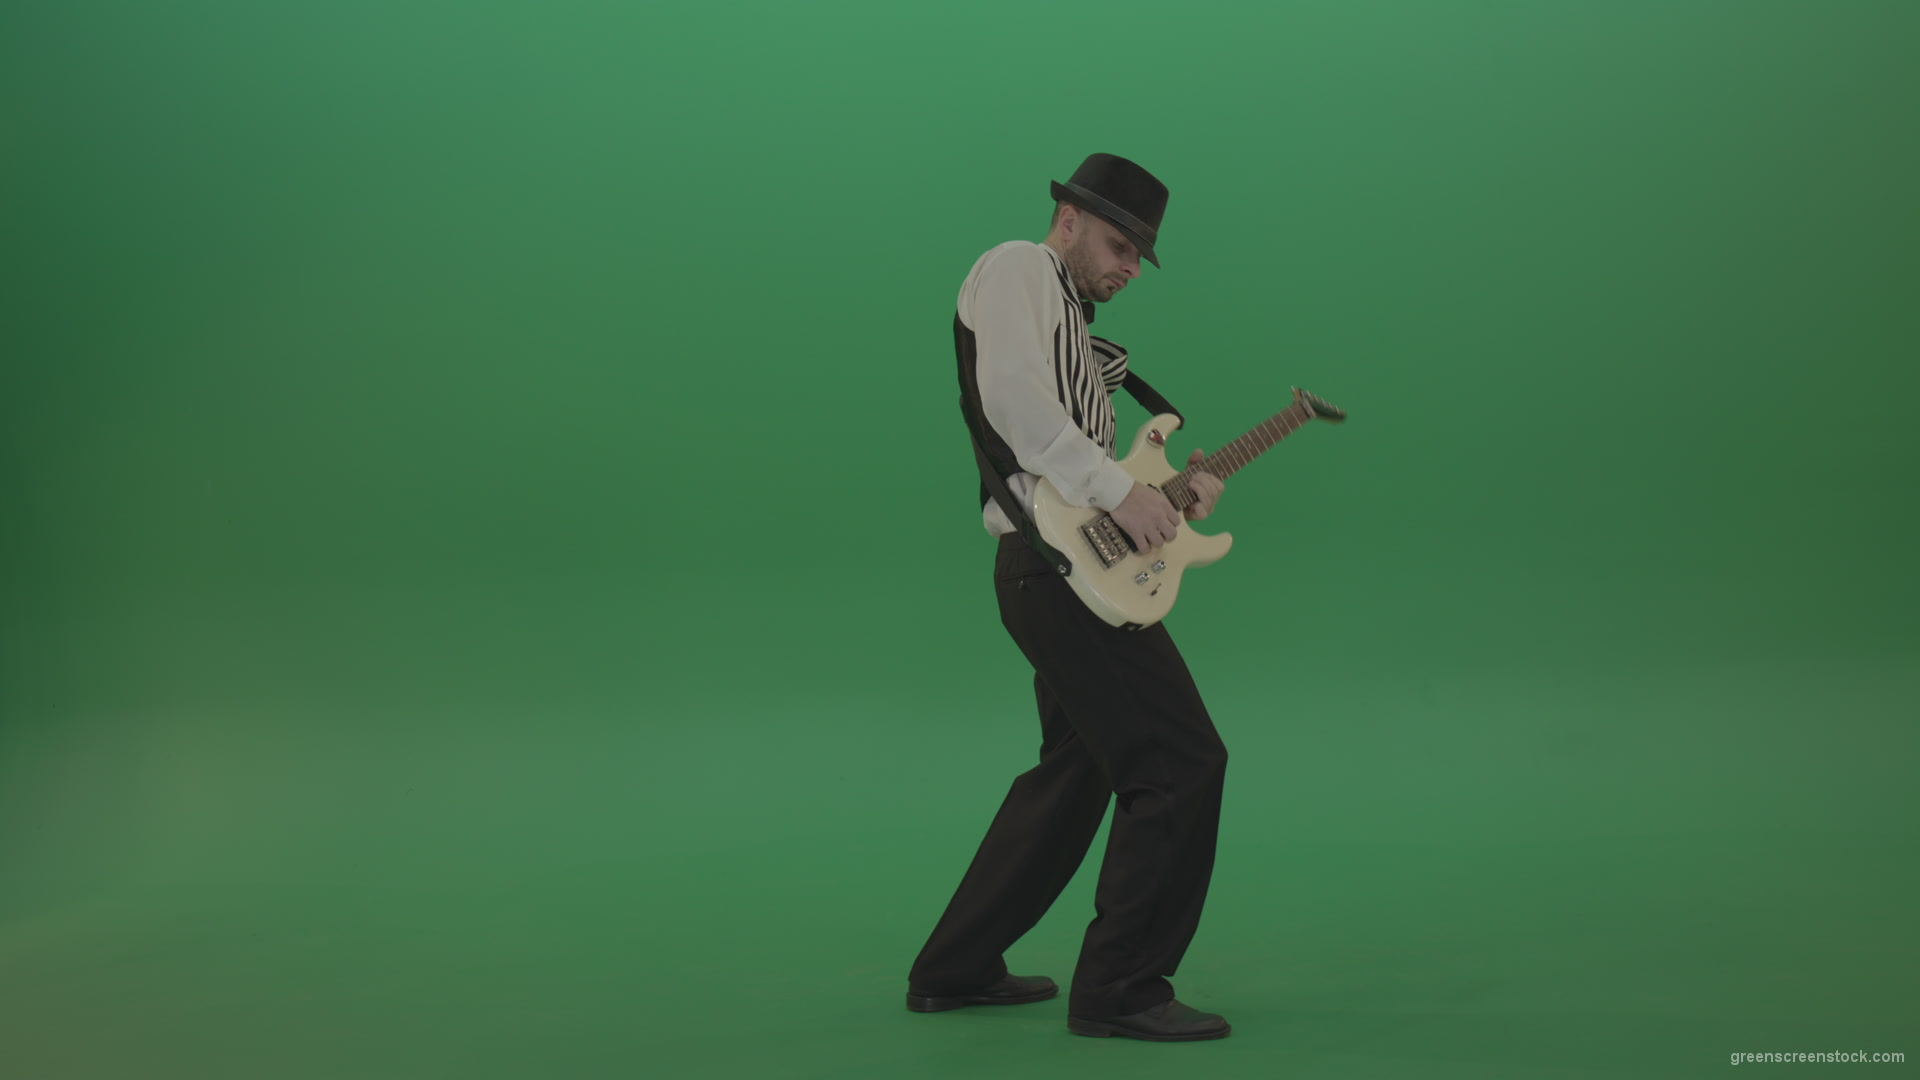 Jazz-man-musician-play-guitar-solo-music-in-guitar-on-green-screen-isolated-in-side-view_007 Green Screen Stock